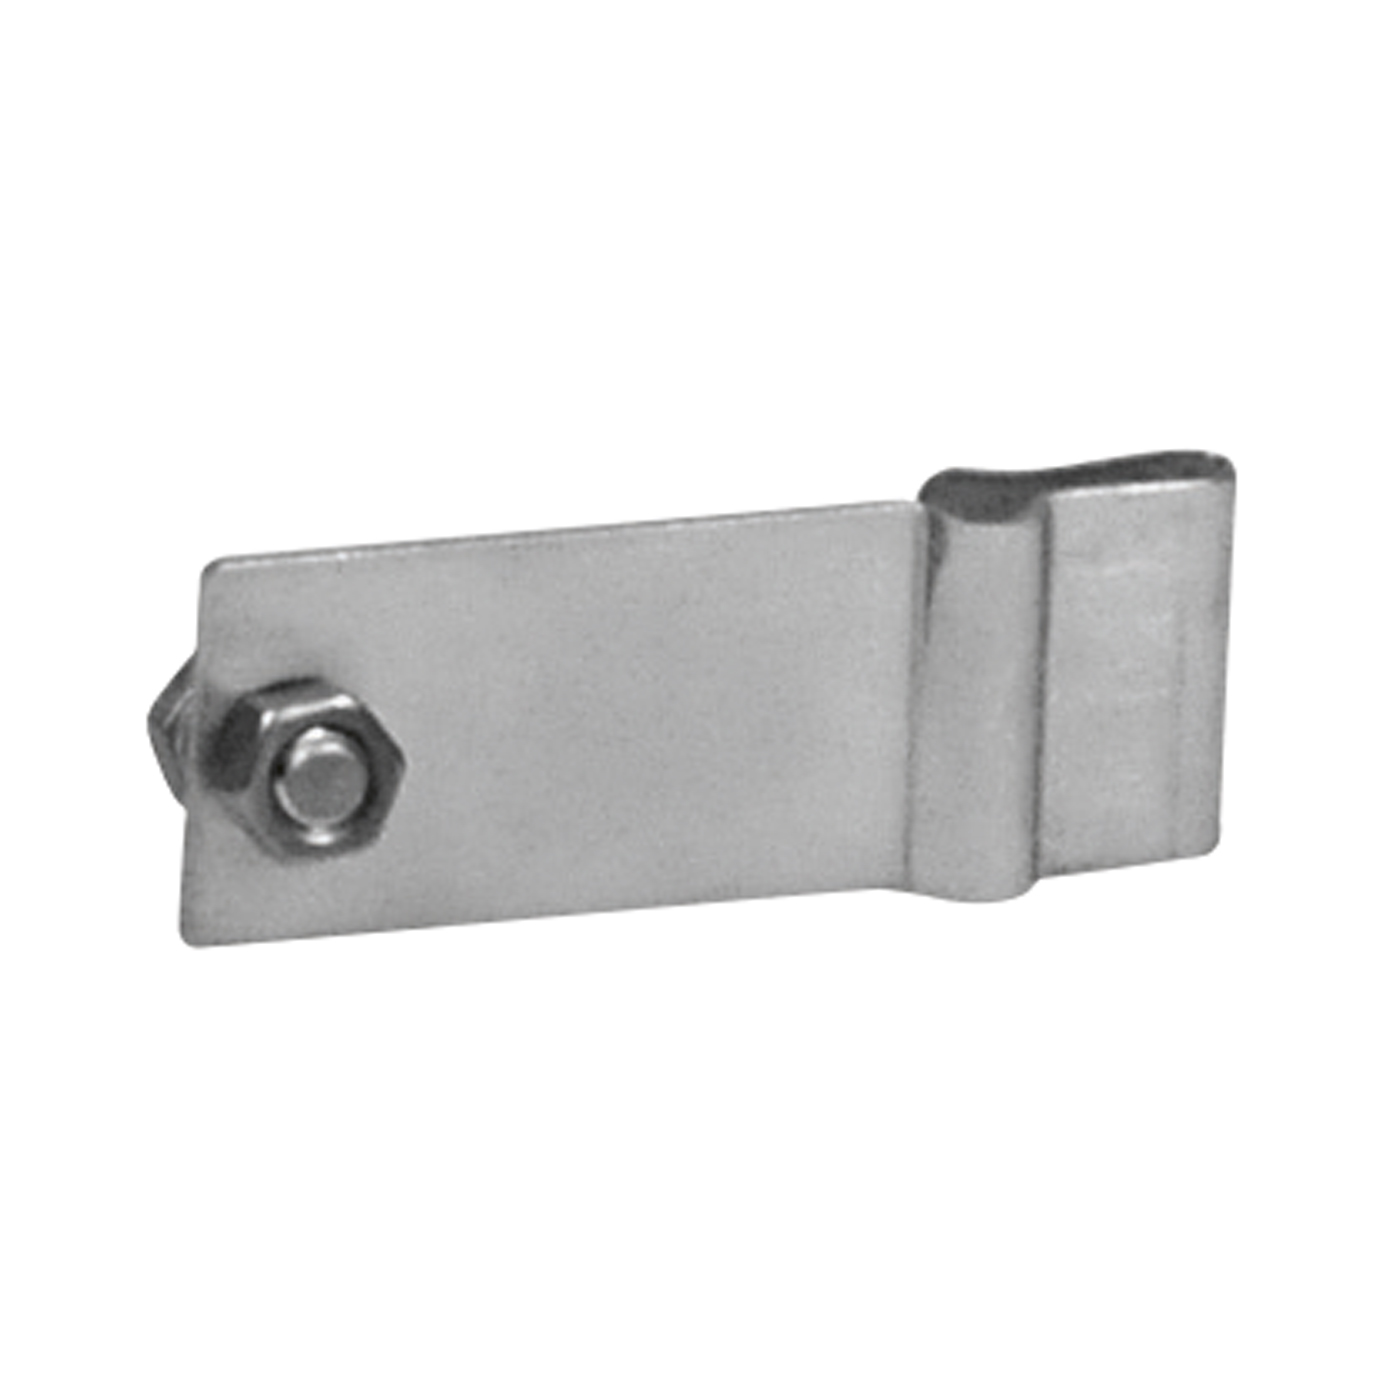 Titanium Holder for Anode, for Silver Anodes - 1 piece